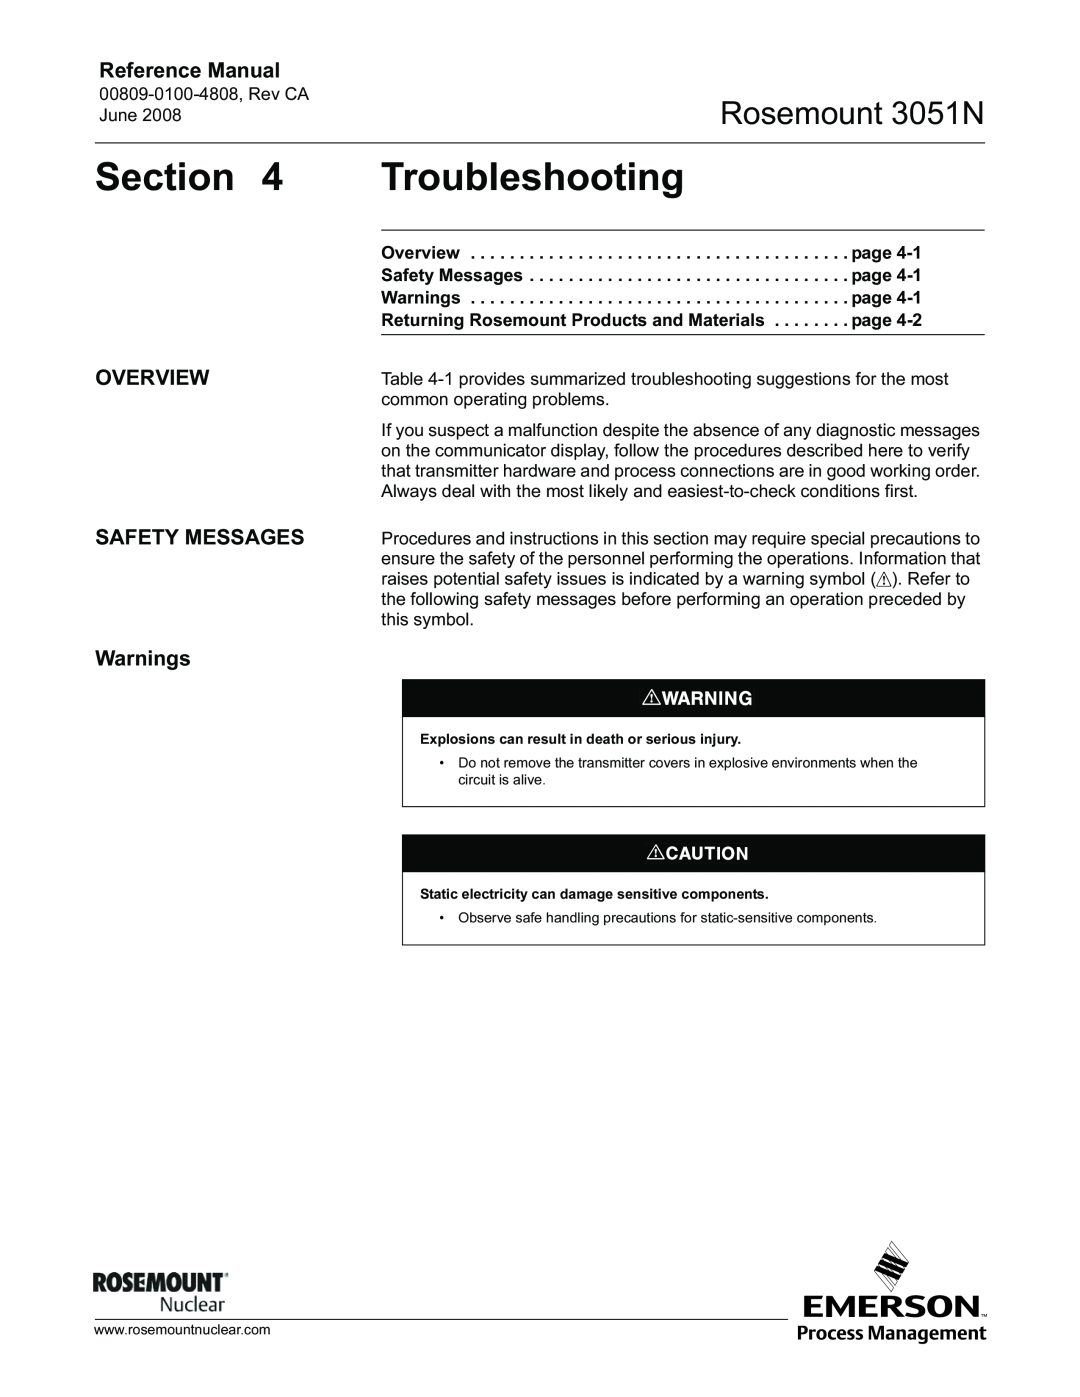 Emerson manual Troubleshooting, Rosemount 3051N, Reference Manual, OVERVIEW SAFETY MESSAGES Warnings 